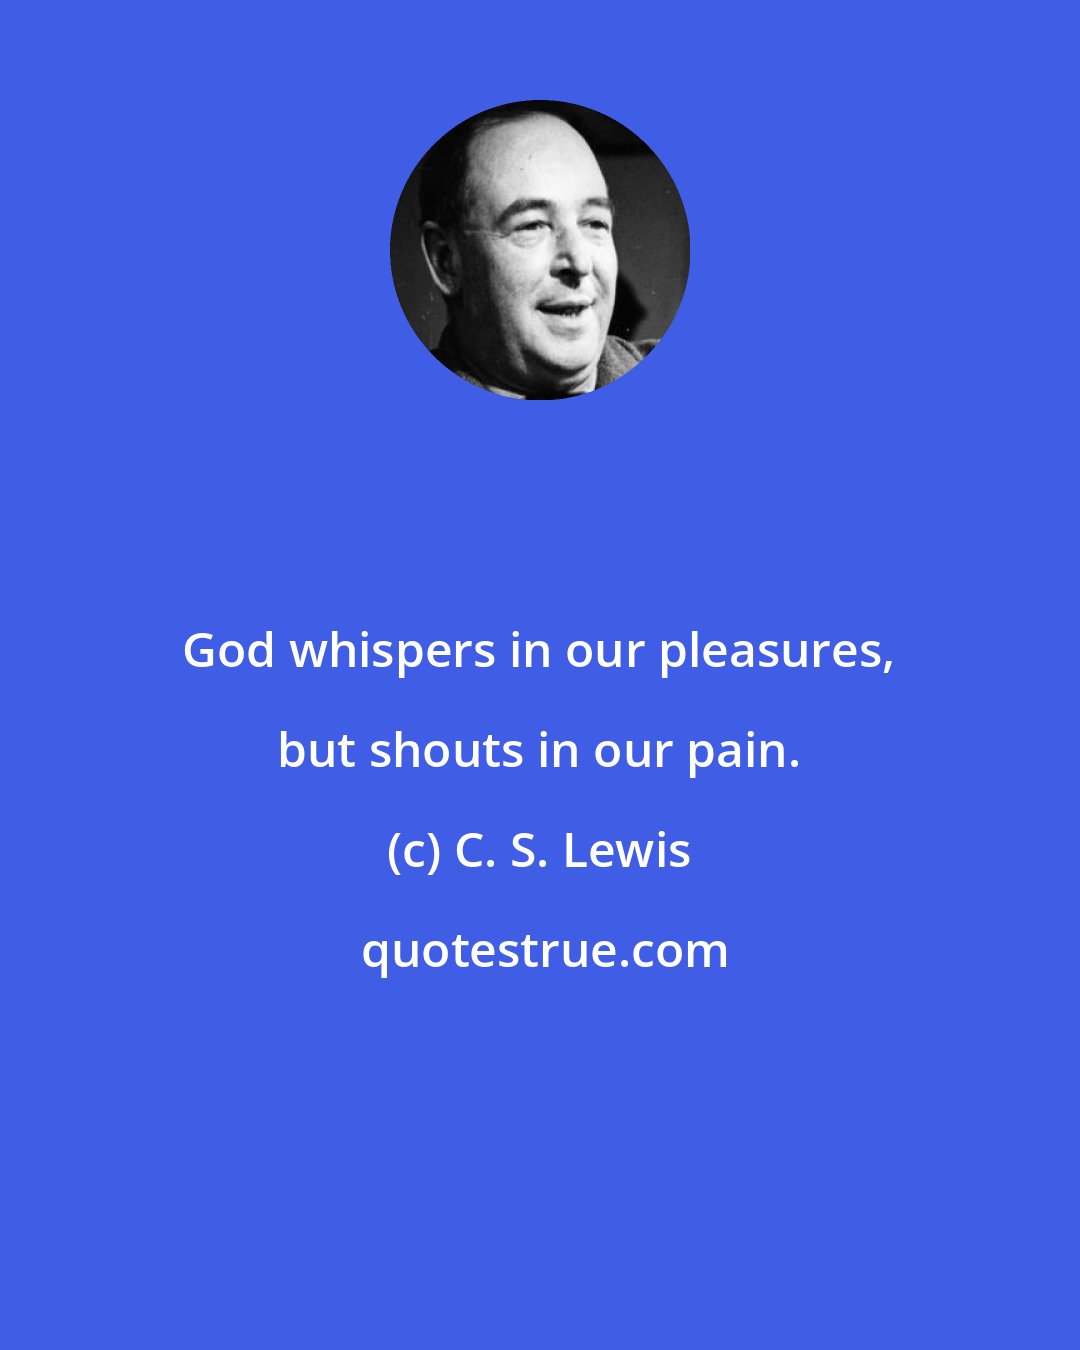 C. S. Lewis: God whispers in our pleasures, but shouts in our pain.